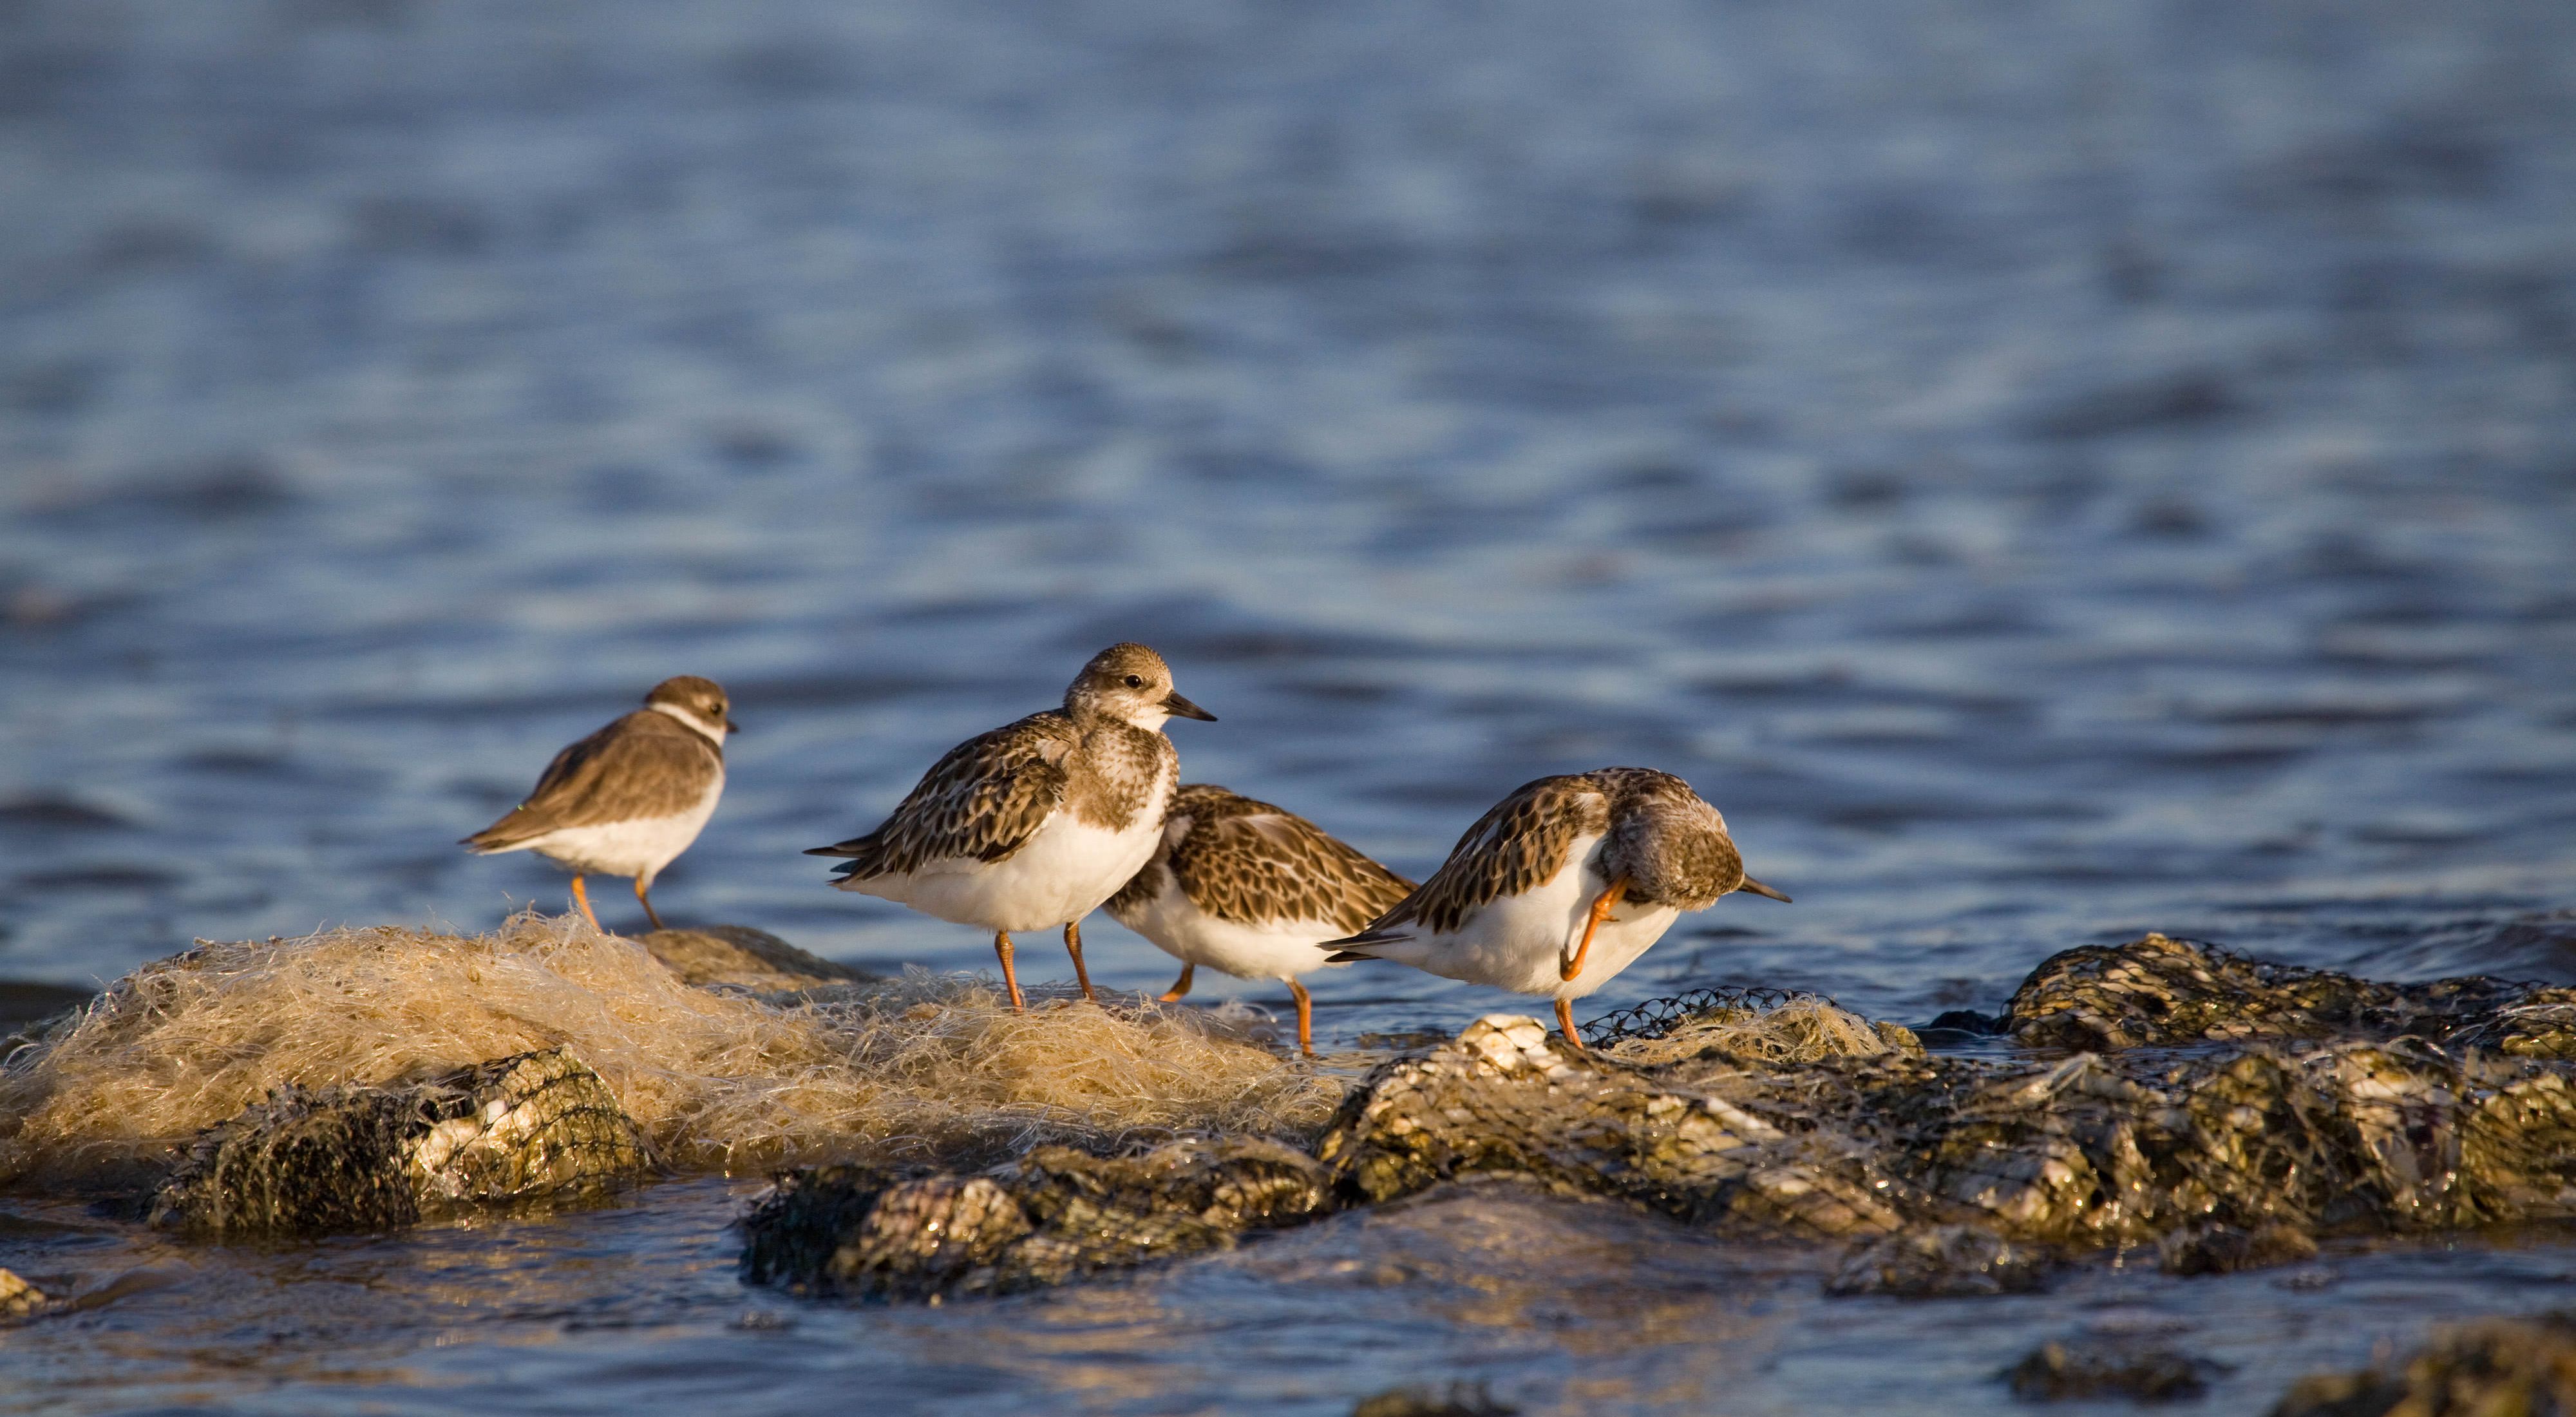 Small brown and white wading birds standing on an oyster reef.